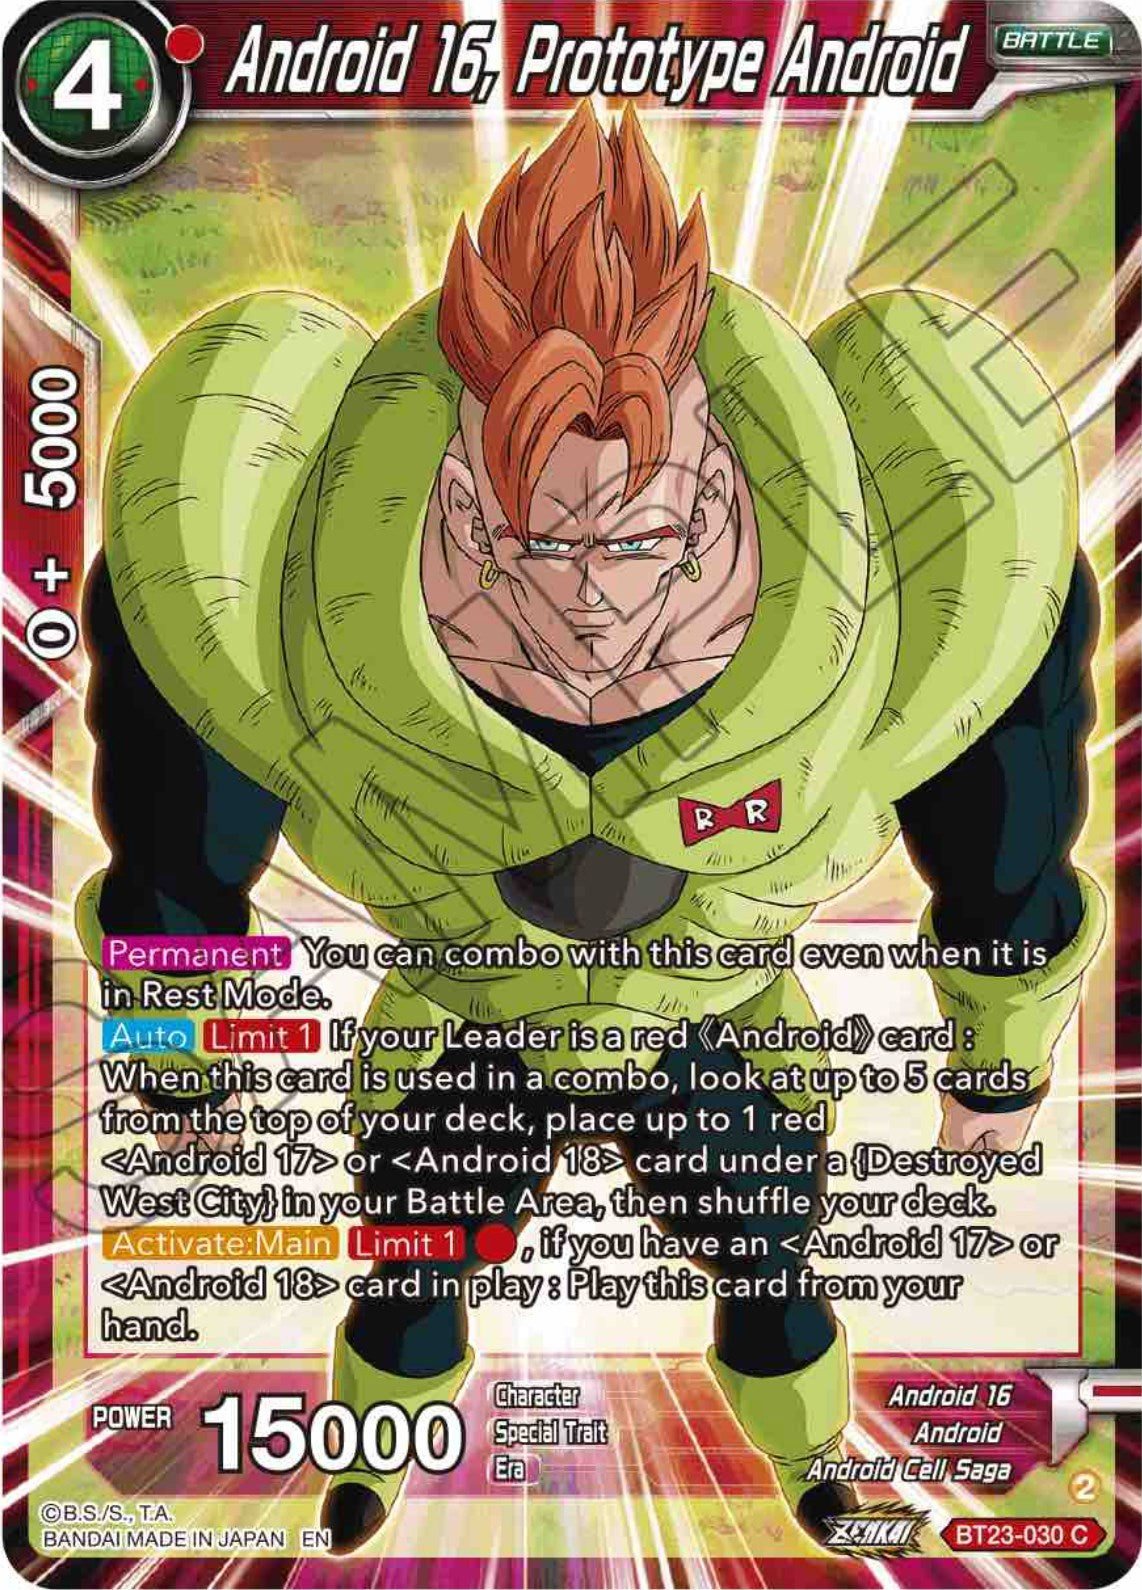 Android 16, Prototype Android (BT23-030) [Perfect Combination] | Shuffle n Cut Hobbies & Games